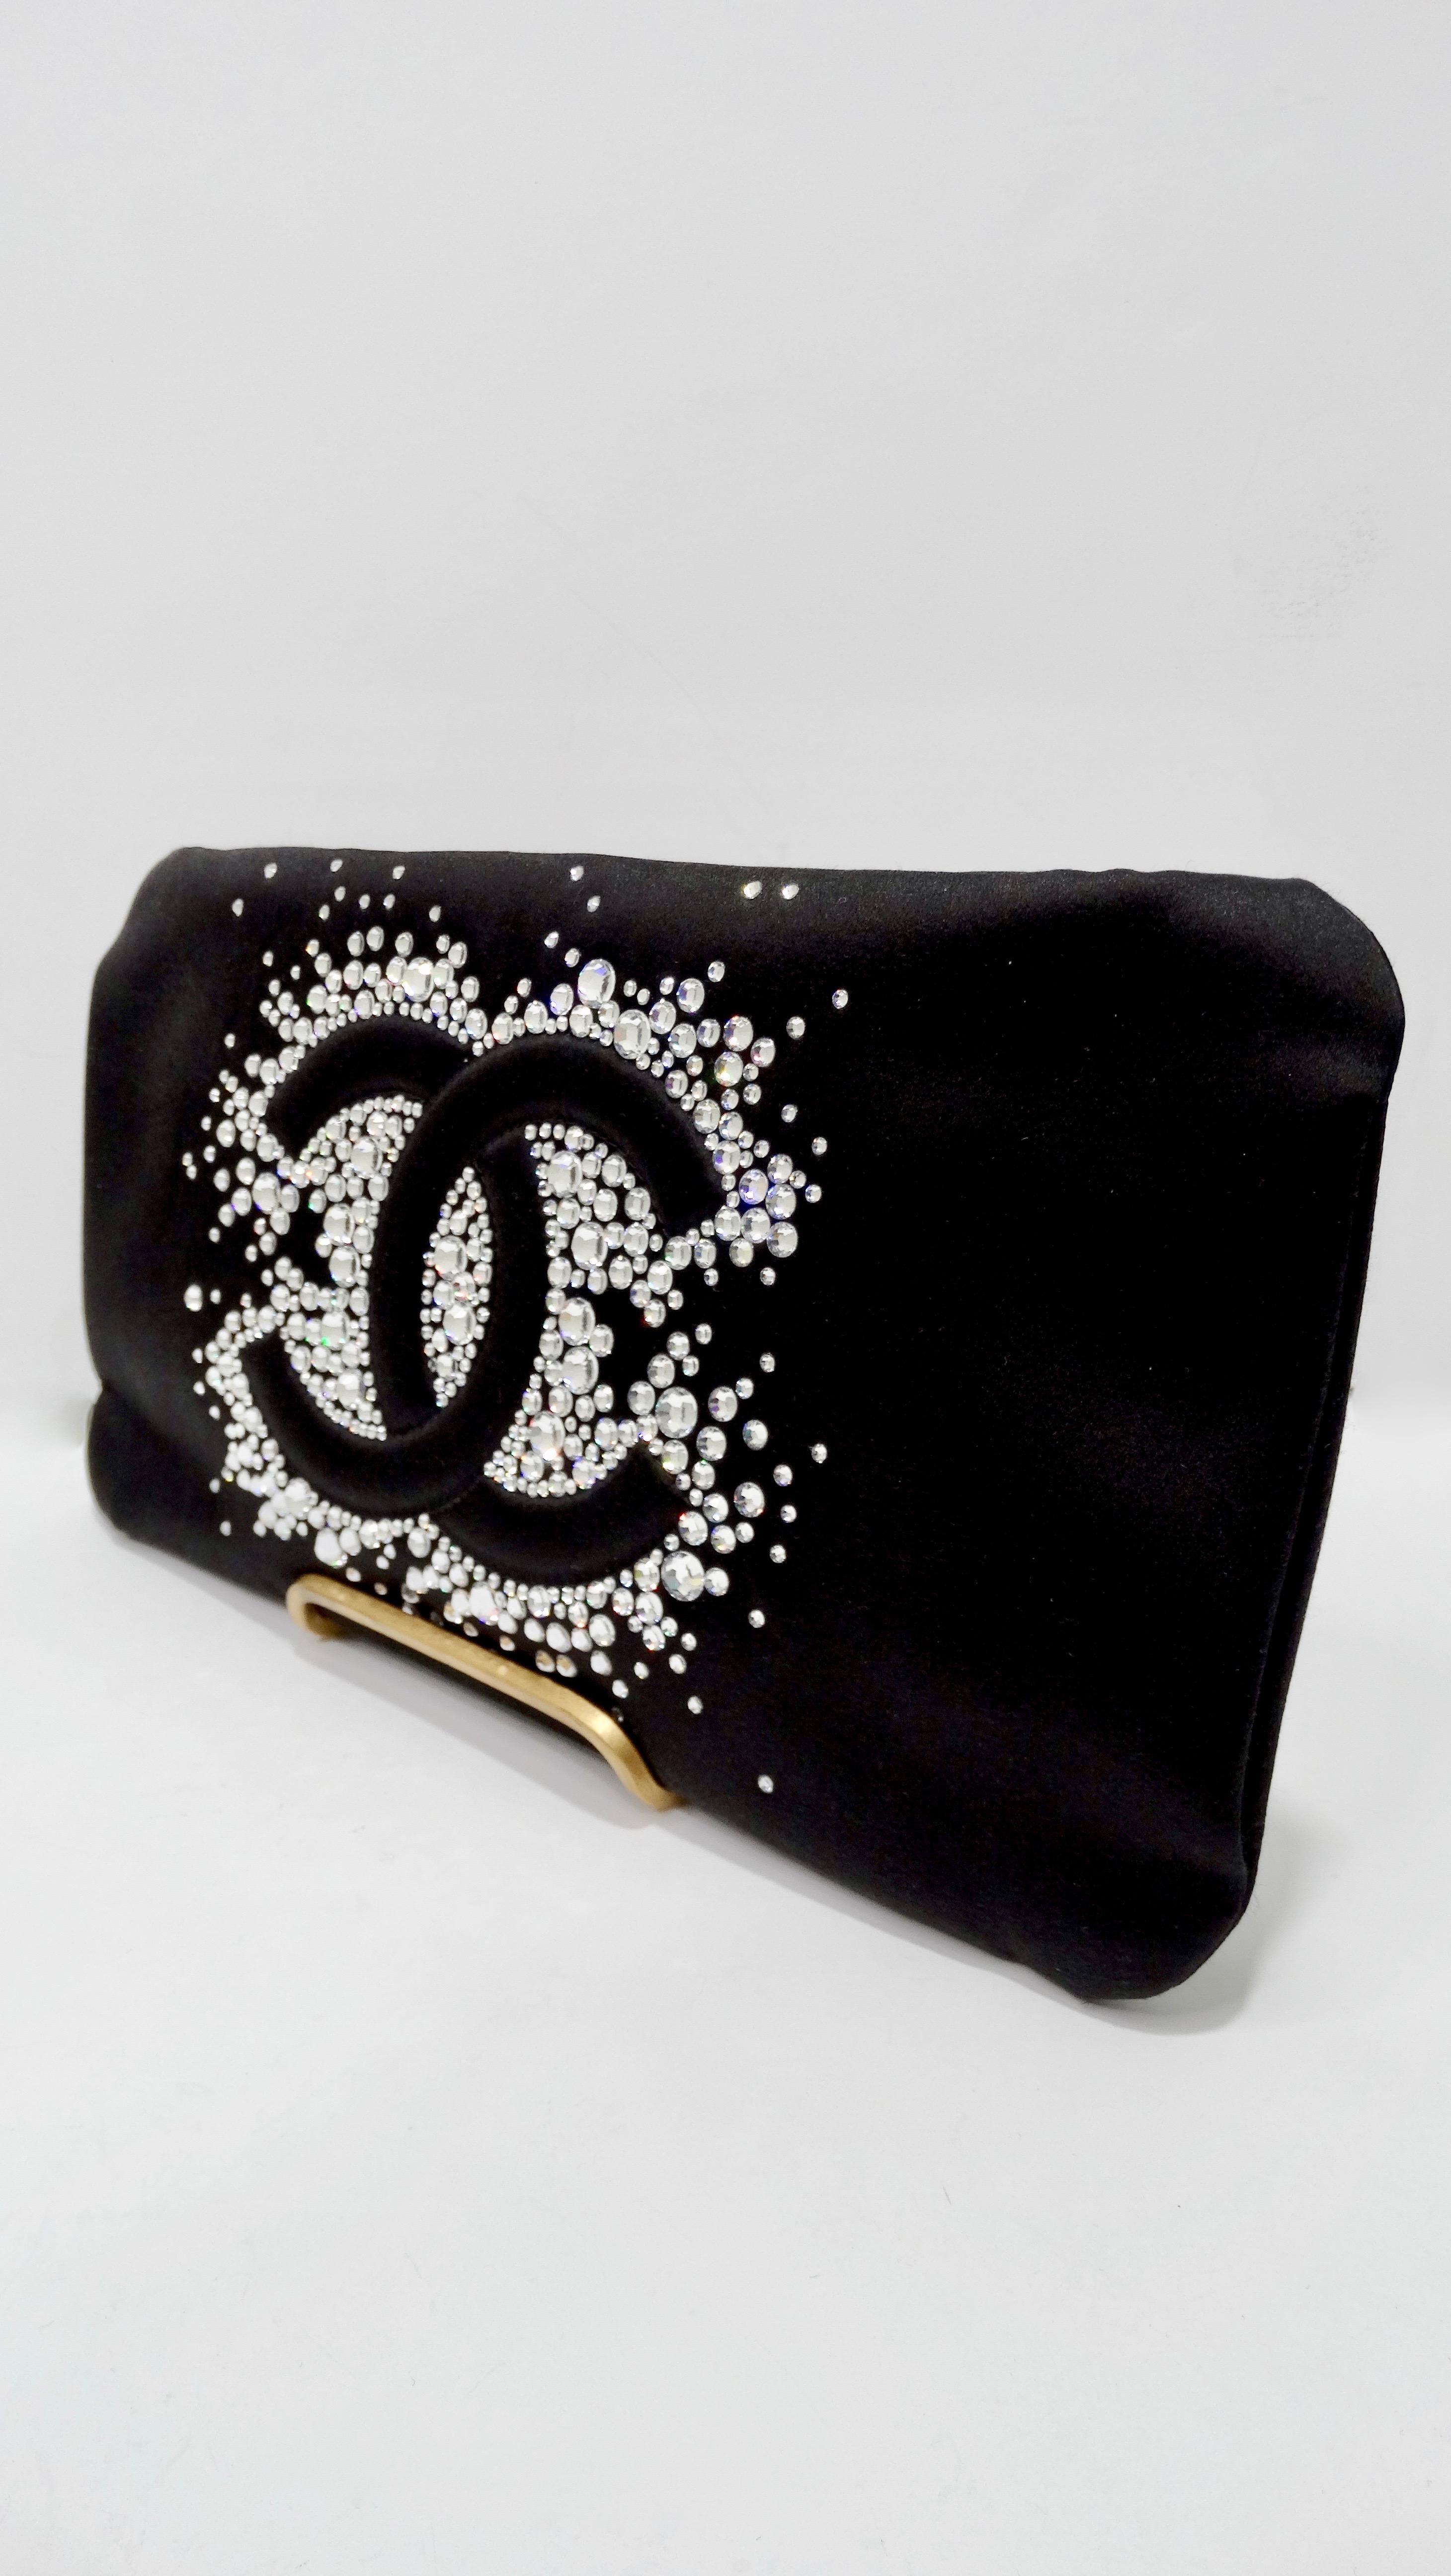 Elevate all your evening looks with this amazing Chanel clutch bag! Circa 2009, this black satin evening clutch features the iconic CC logo surrounded by glittering crystal rhinestones, a top zipper closure, and a single ruthieum chain. Interior is